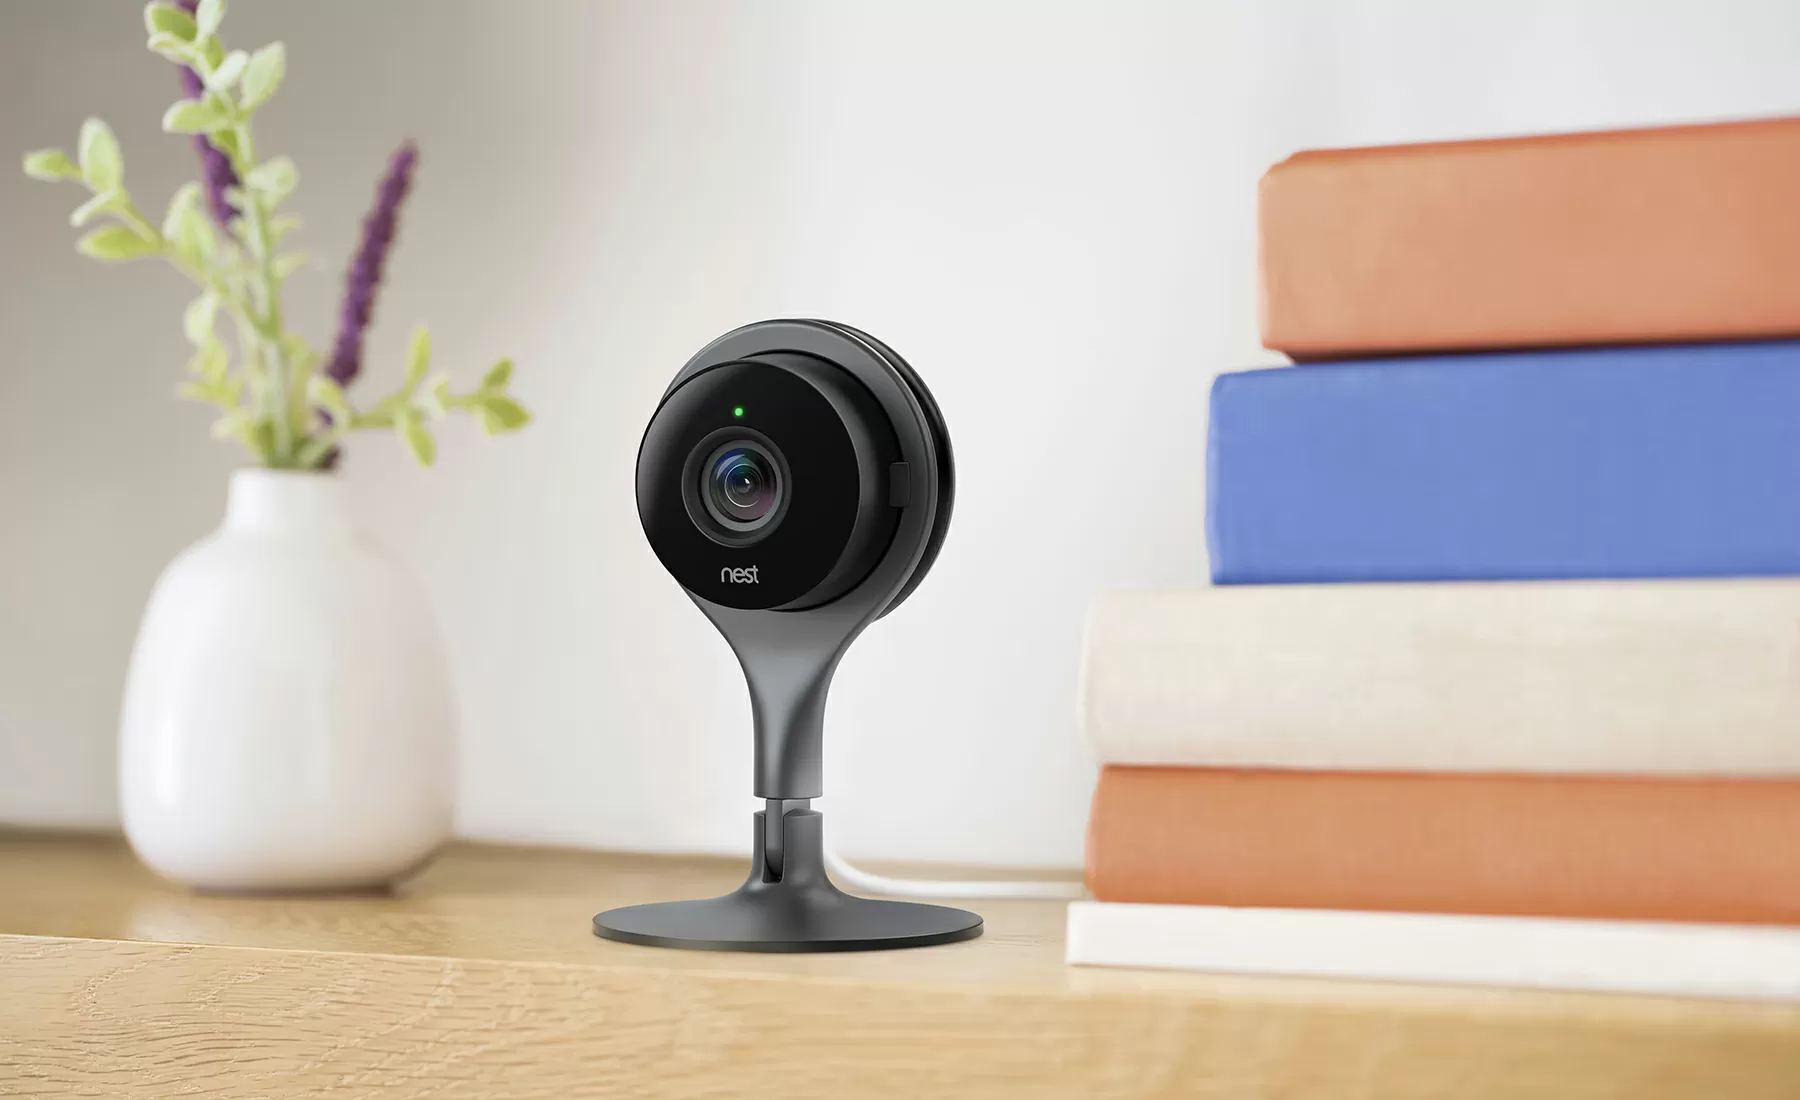 Google is reducing its Nest cameras' video quality to ease network strain